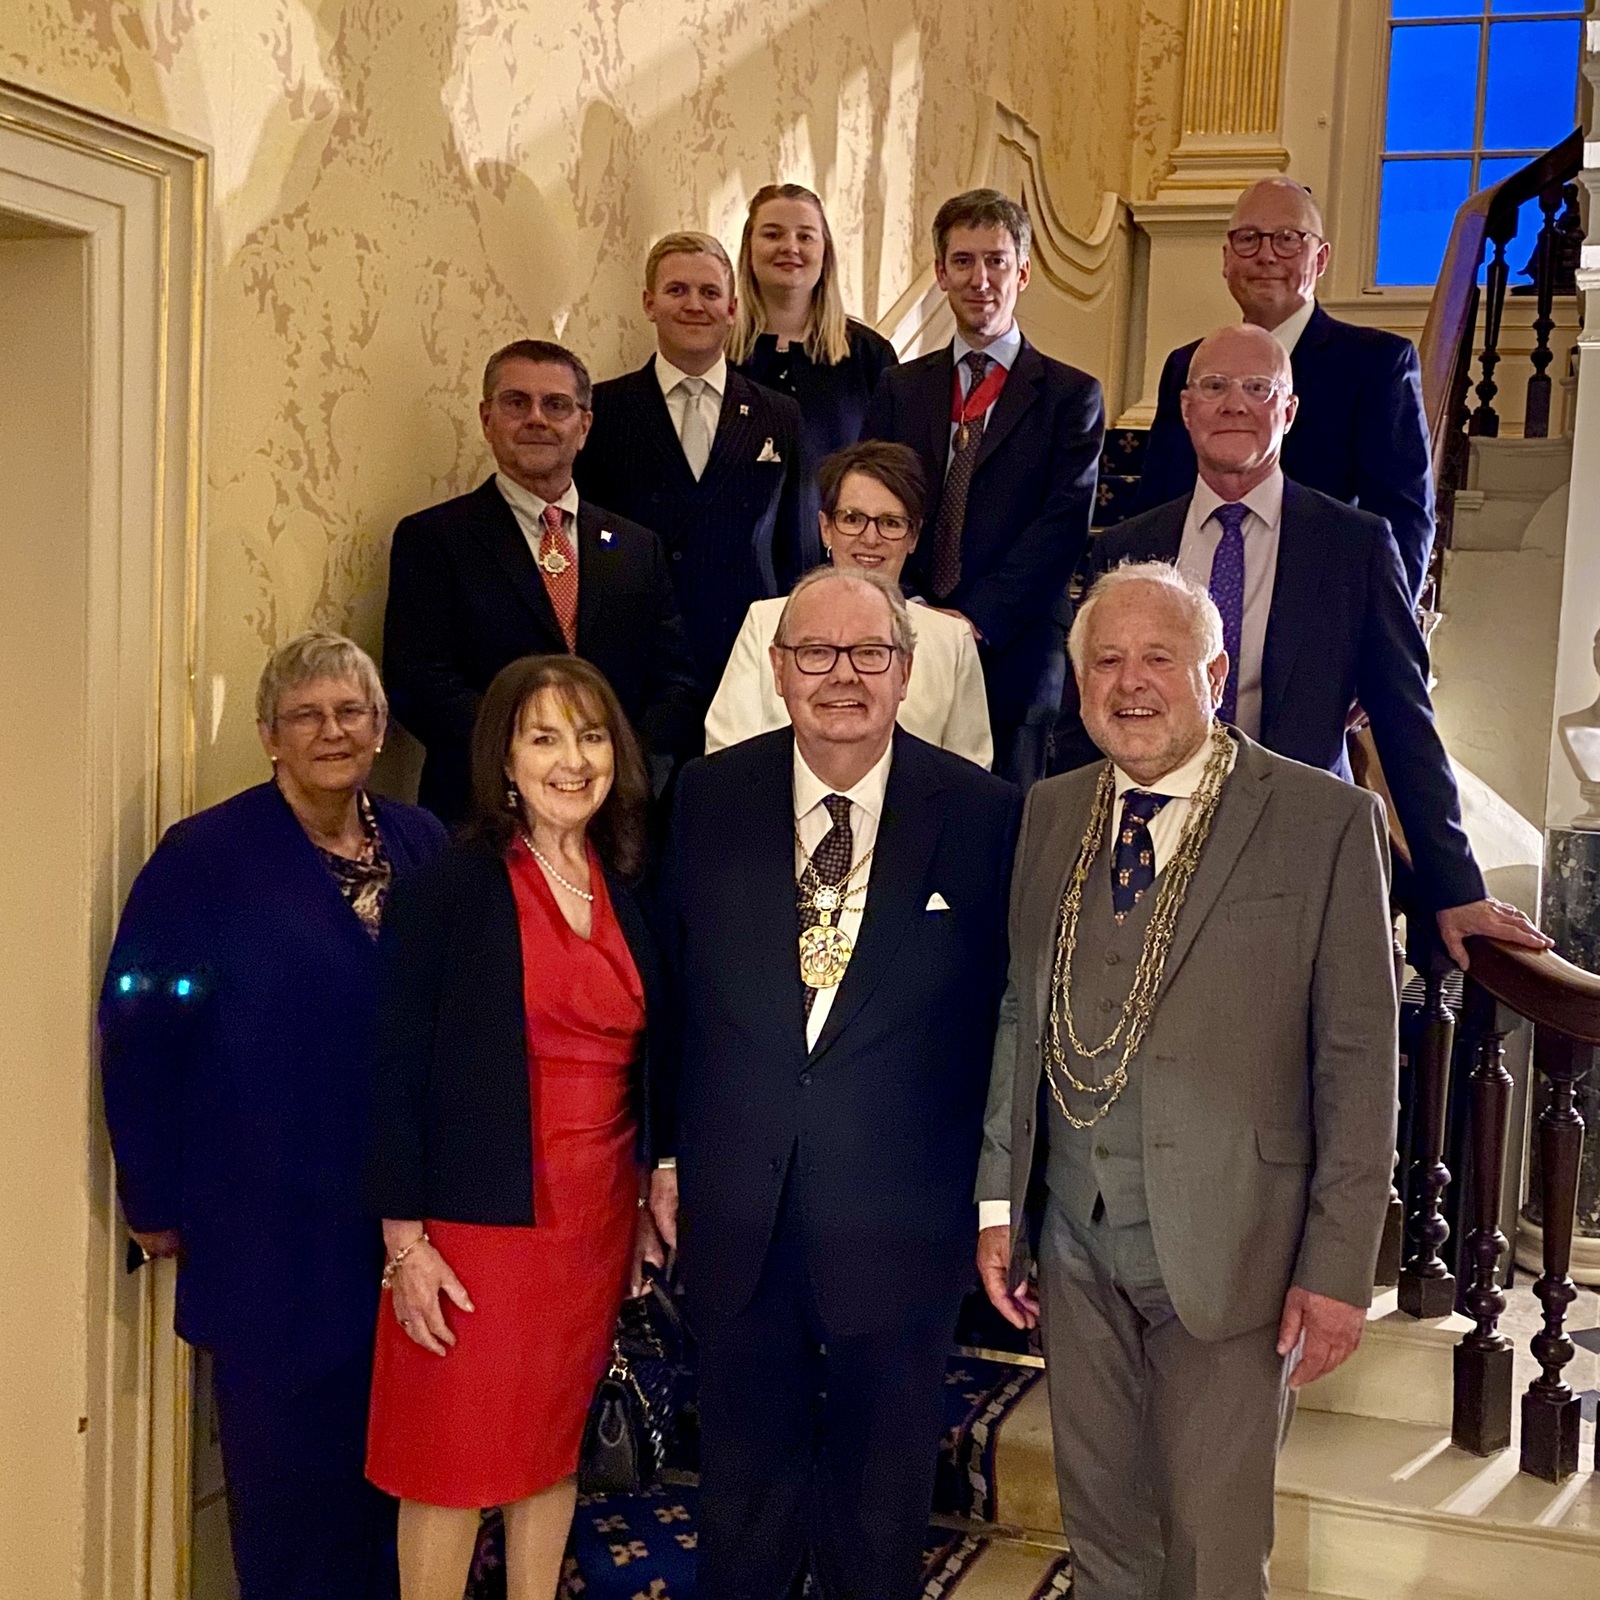 31 May 2023 - Day 1 of York Trip - Honoured to have Dinner with the Rt Hon The Lord Mayor Cllr Chris Cullwick in the remarkable 1732 Mansion House, York.